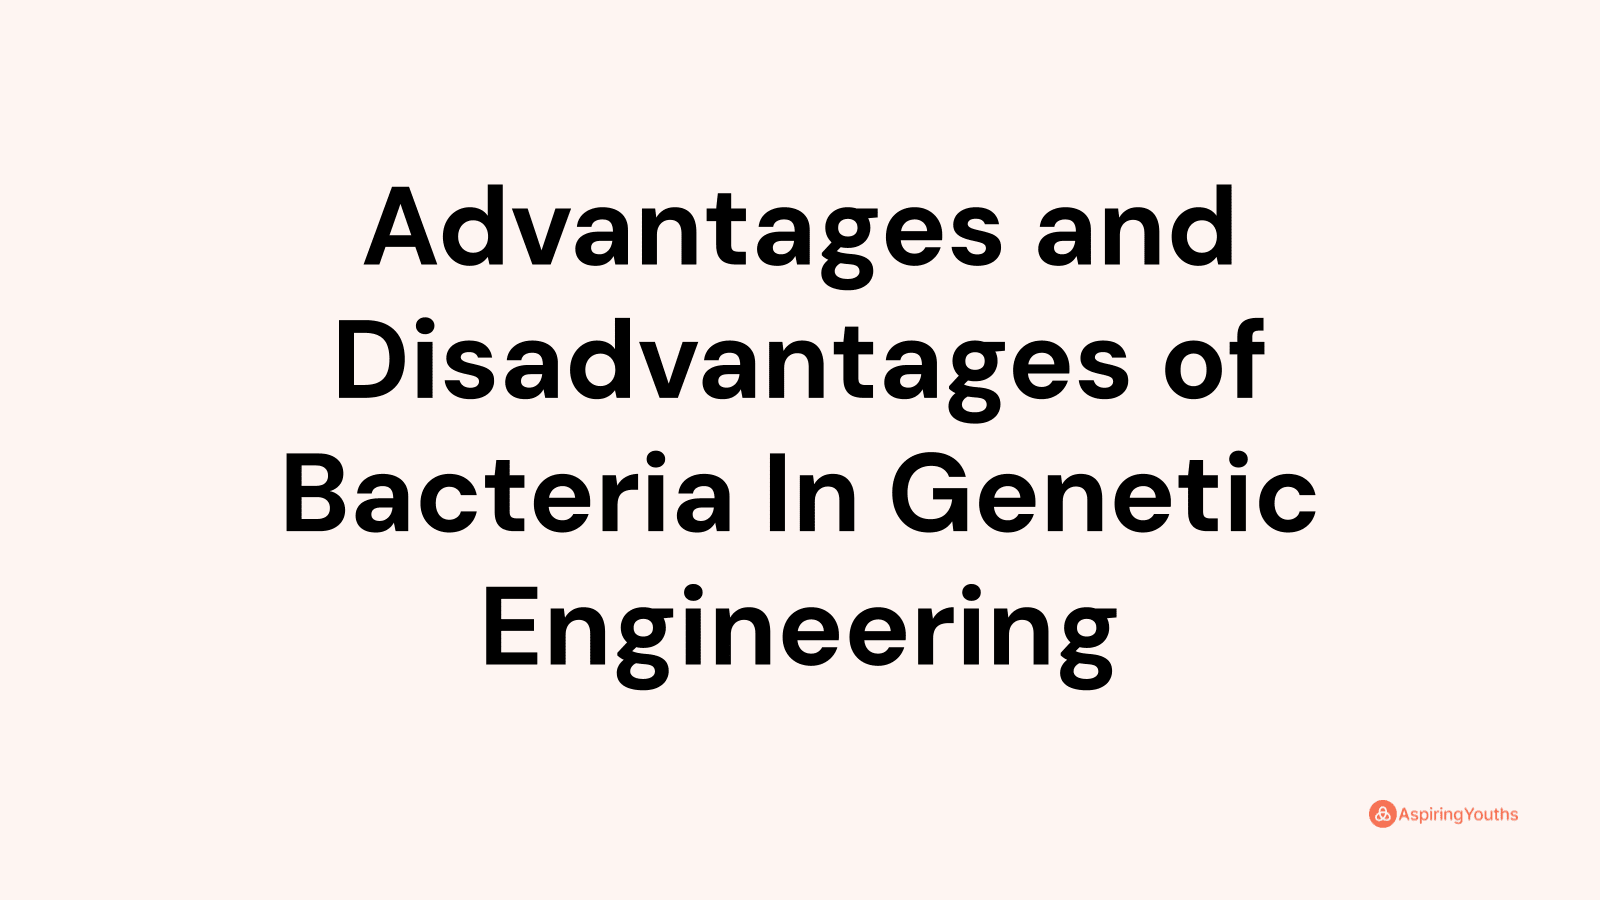 Advantages and disadvantages of Bacteria In Genetic Engineering